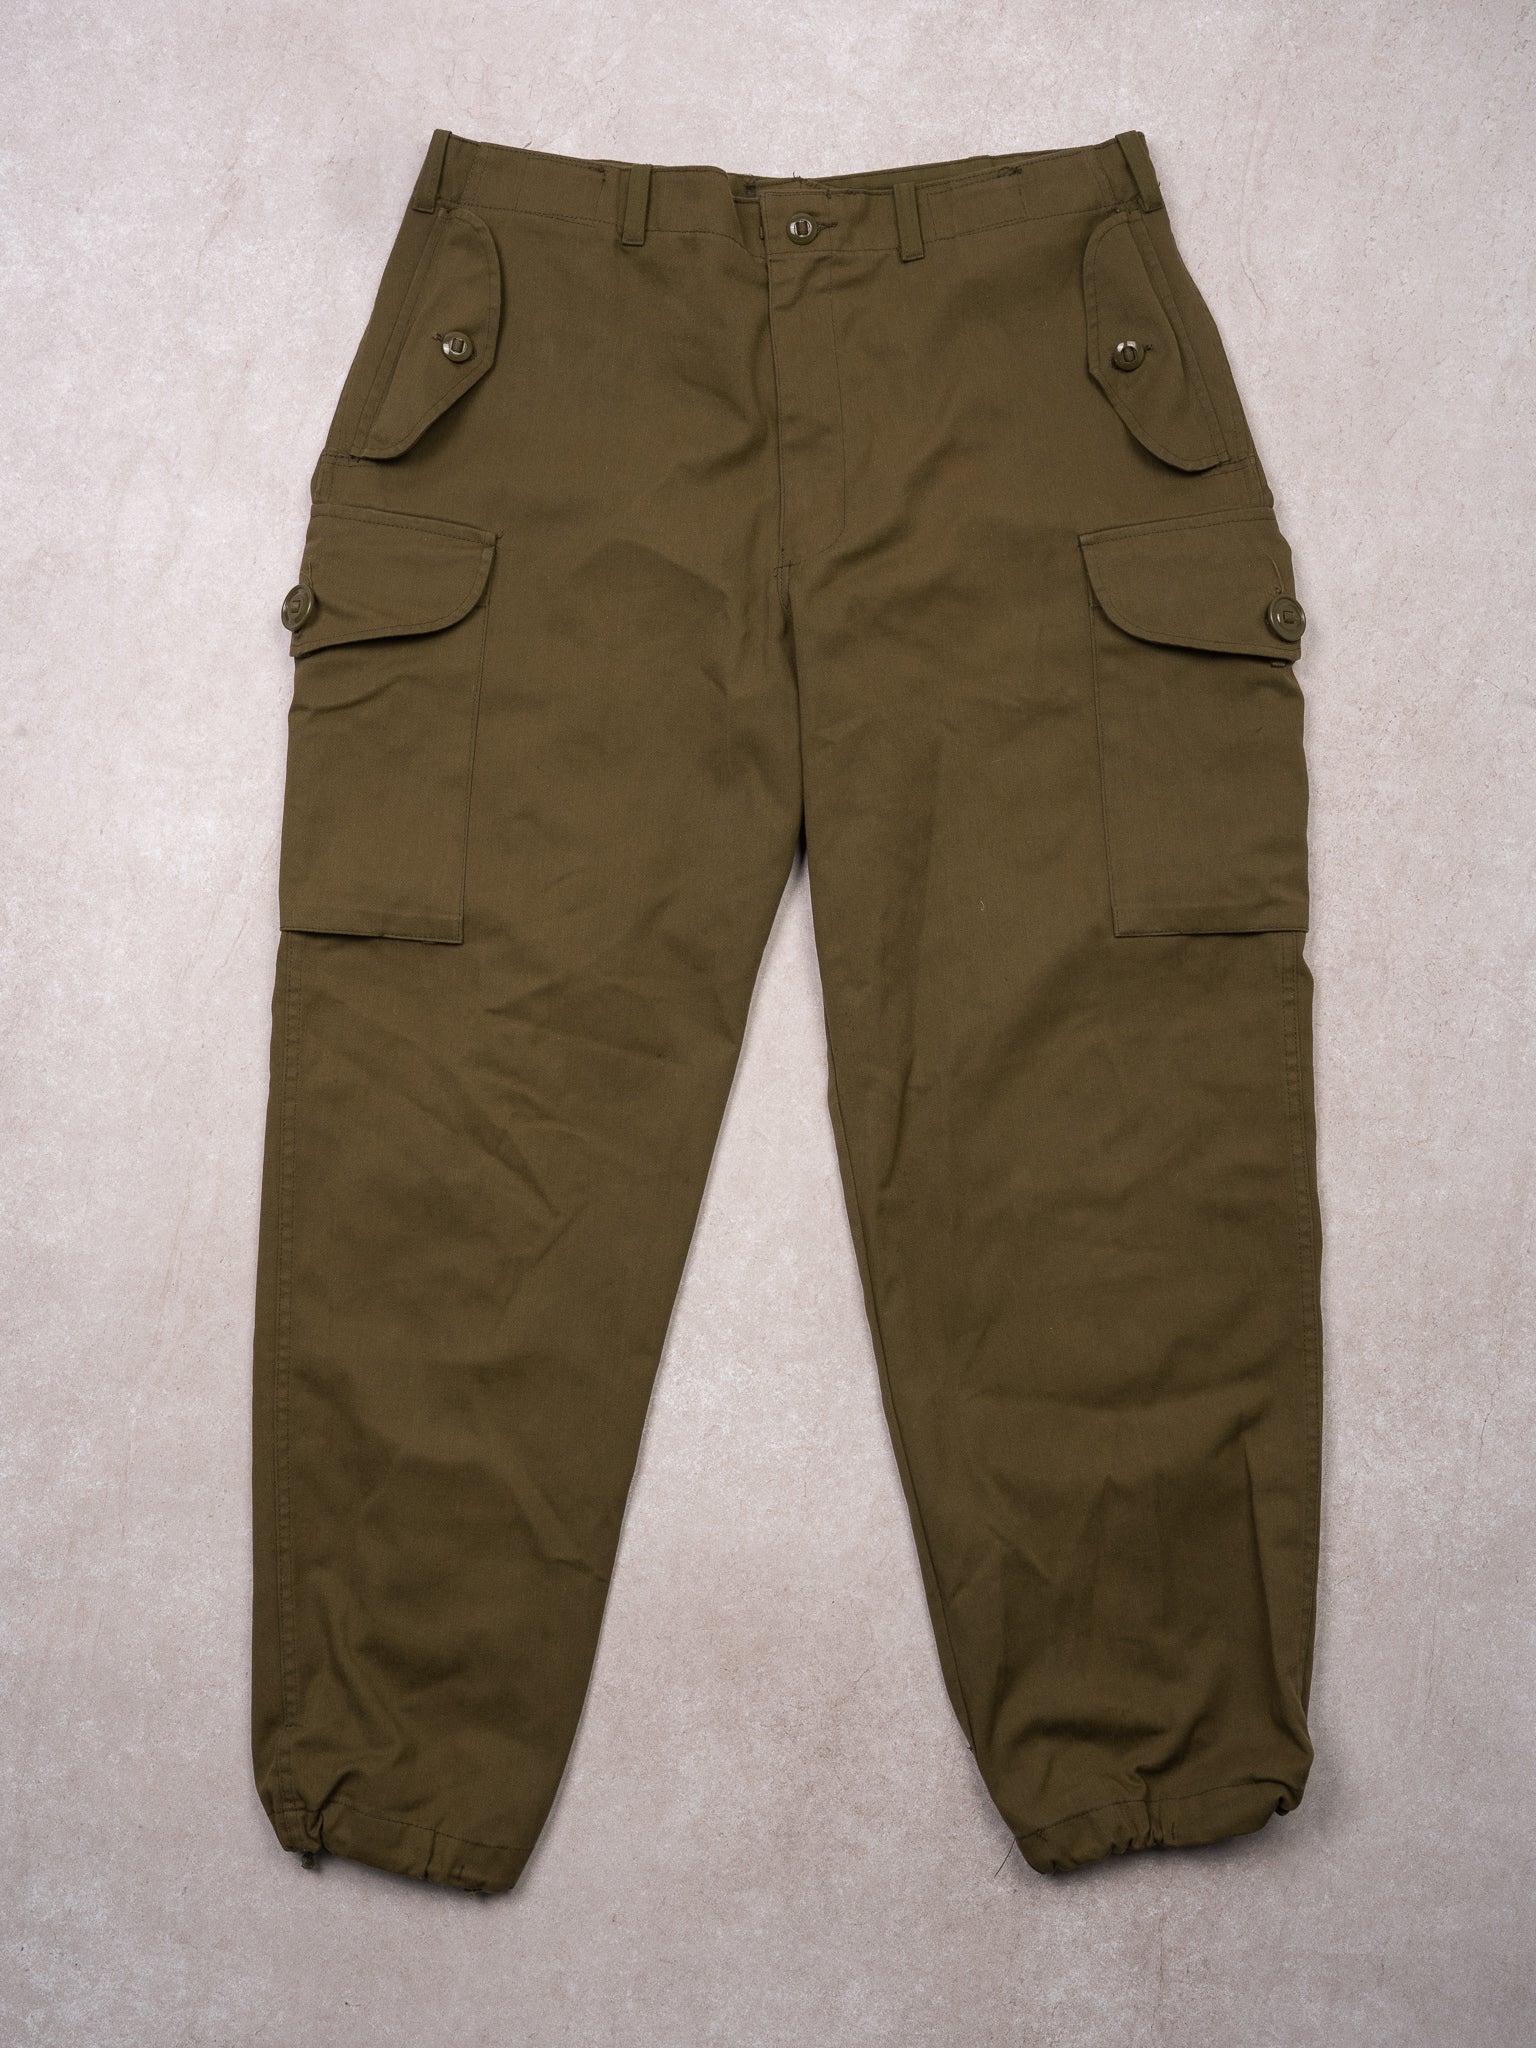 Vintage Green Army Outer Shell Combat Pants (36 x 30)